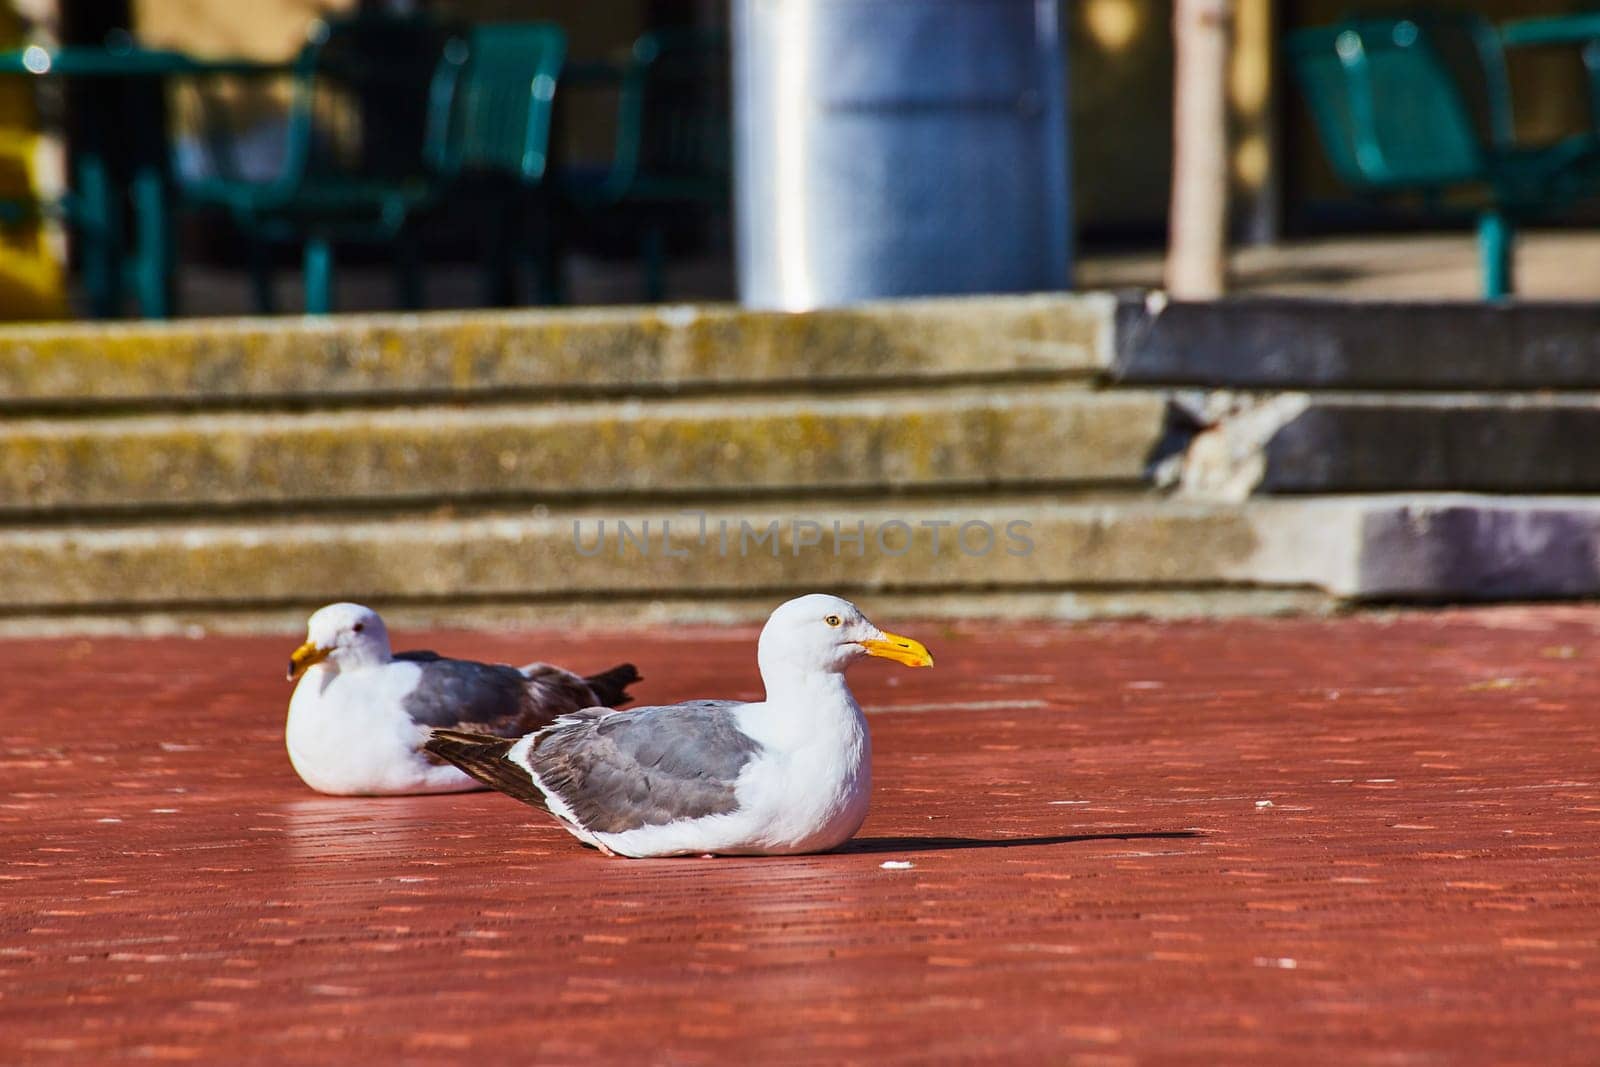 Image of Two seagulls rest together on red brick pathway with judgmental looks